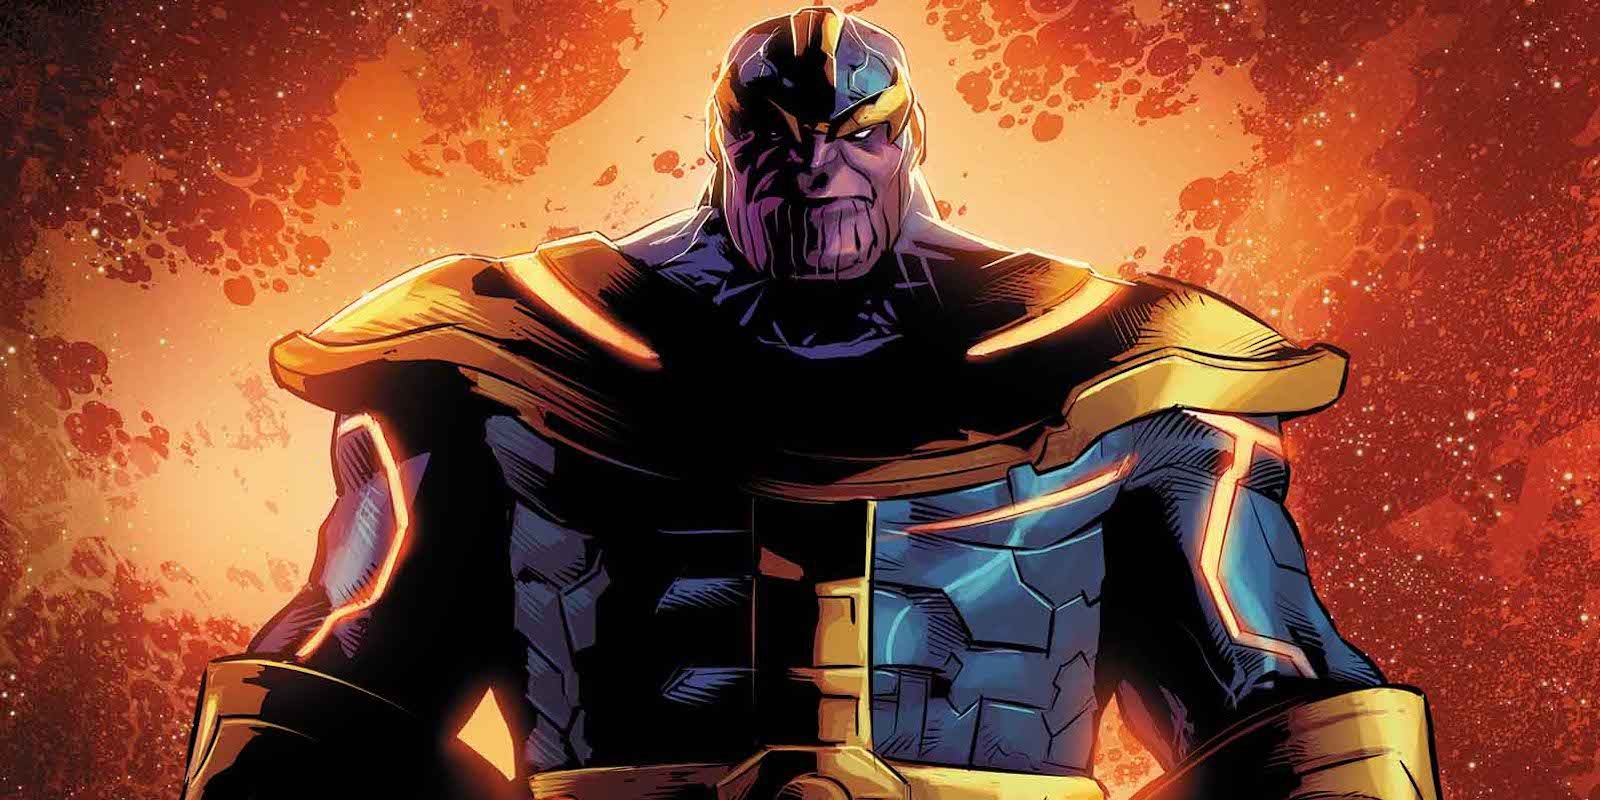 Thanos’ MCU Origin & Motivations Are Different from the Comics